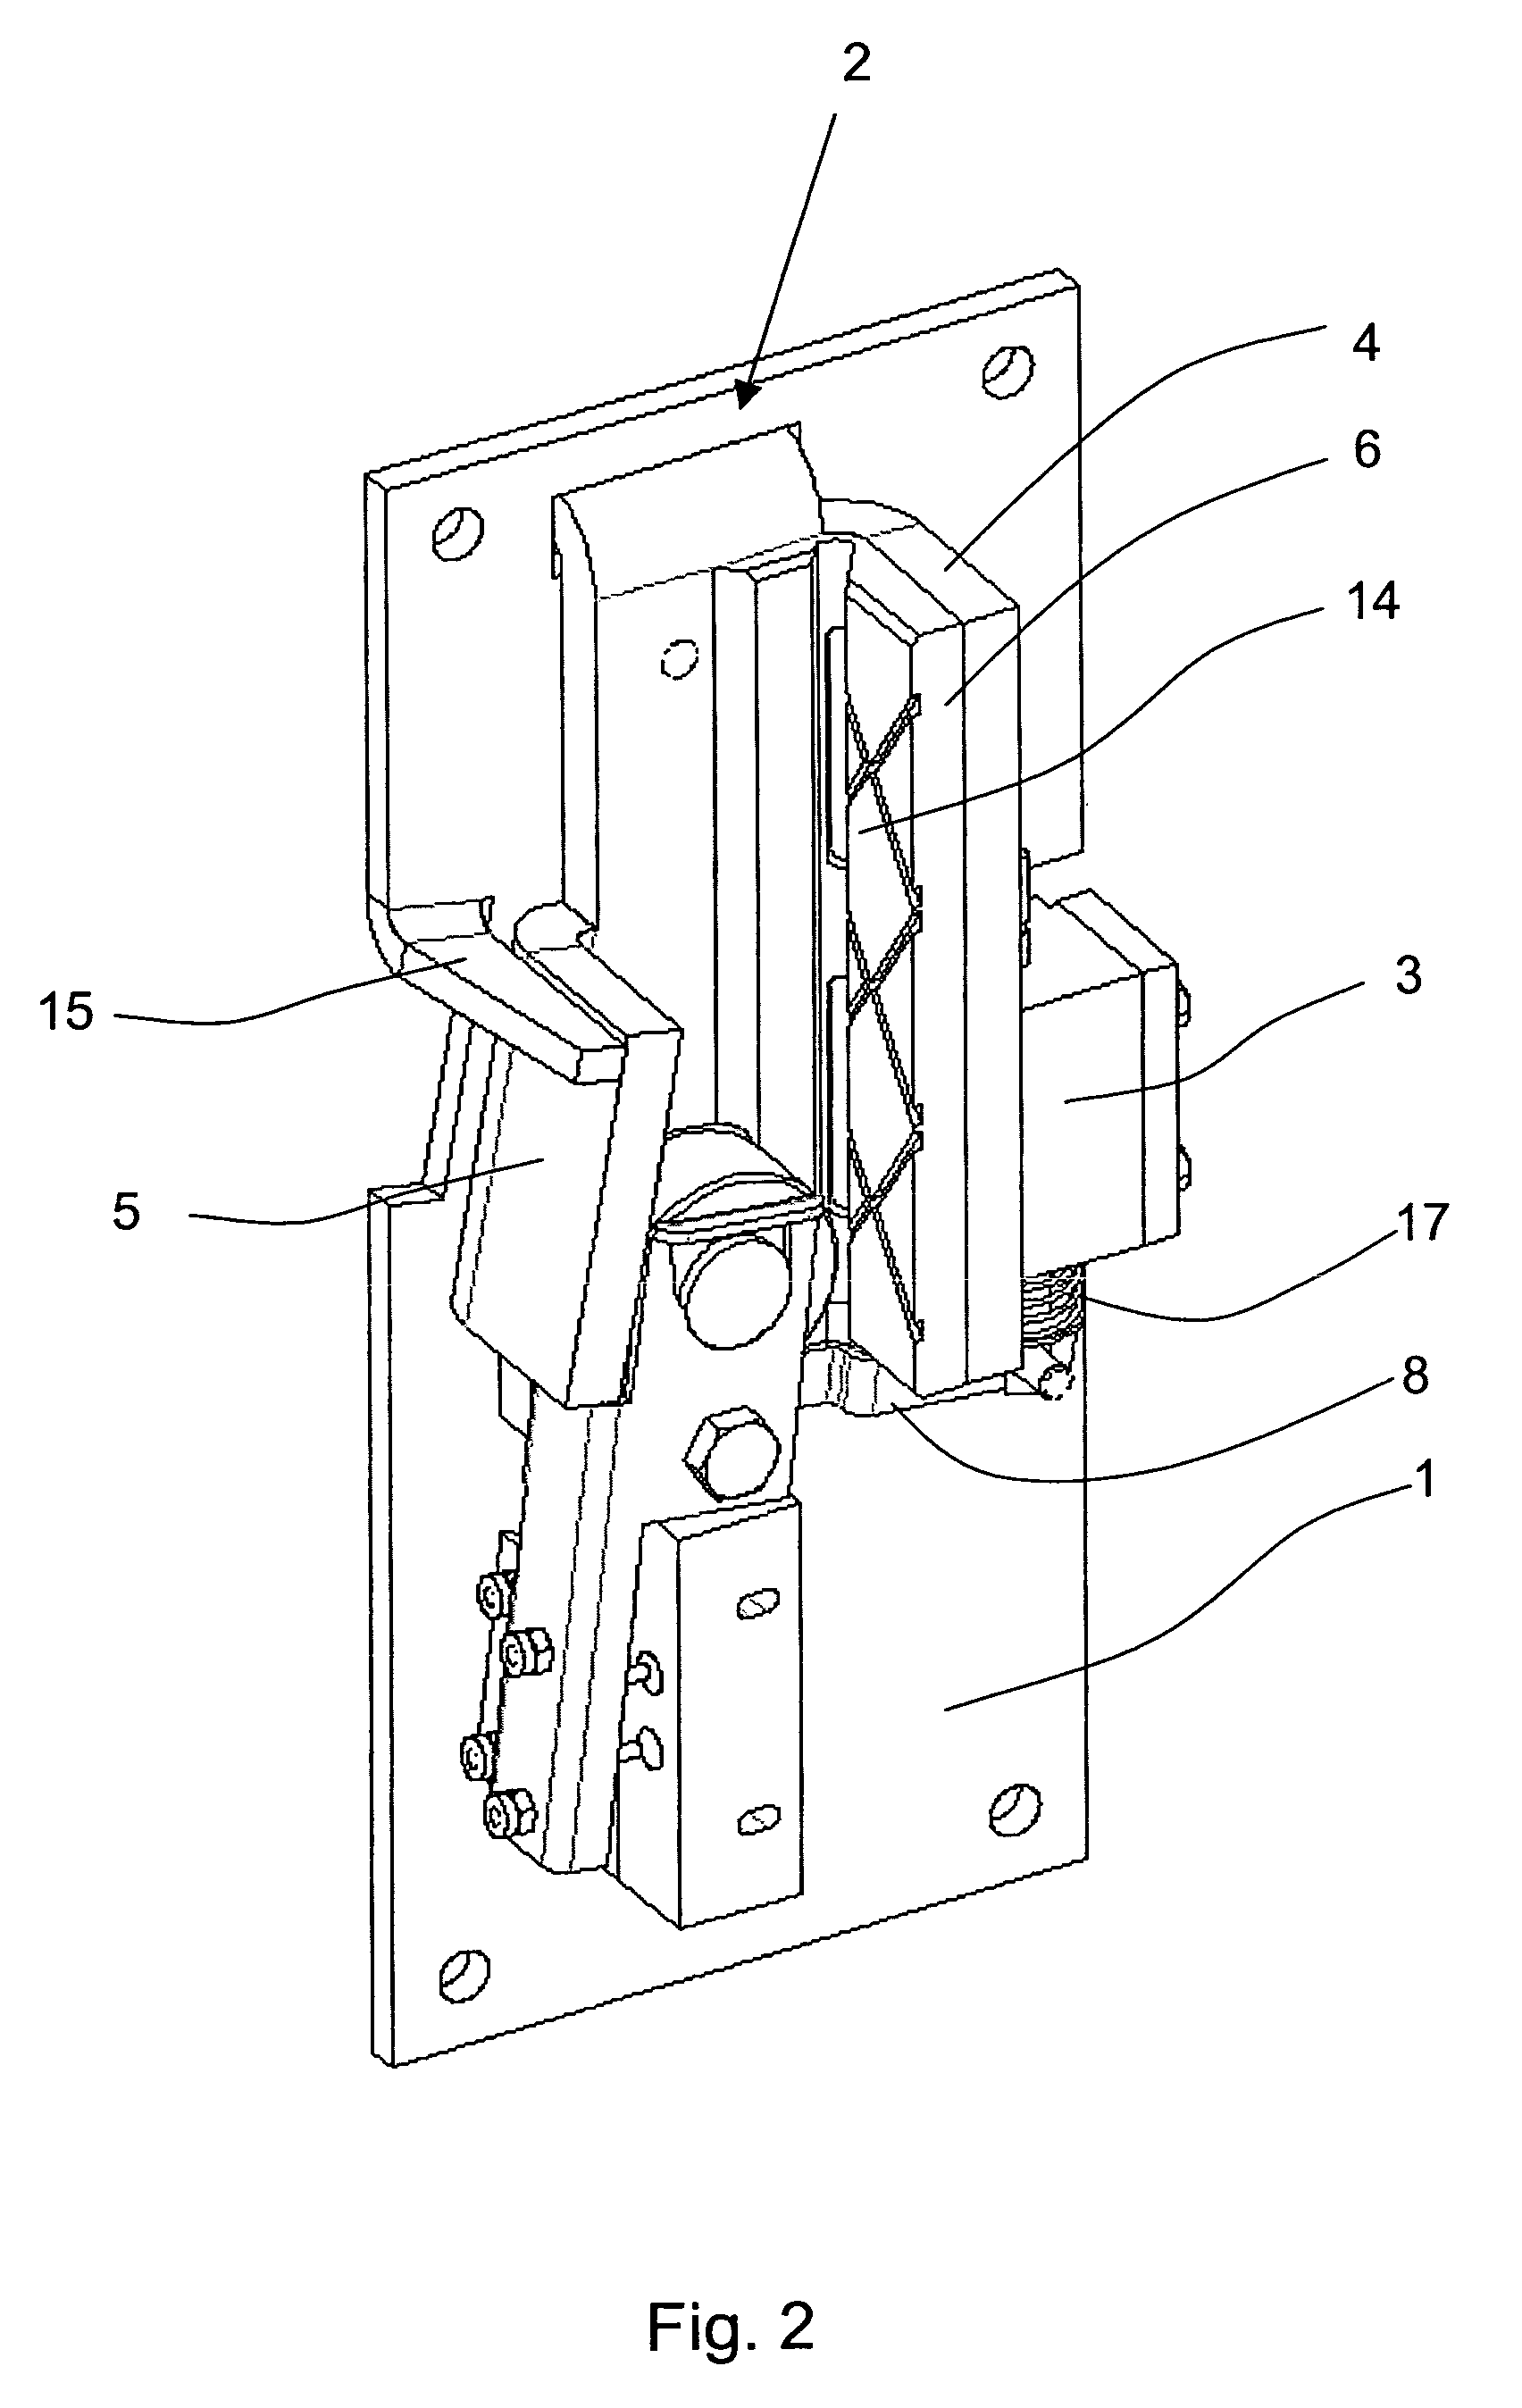 Safety device for elevators